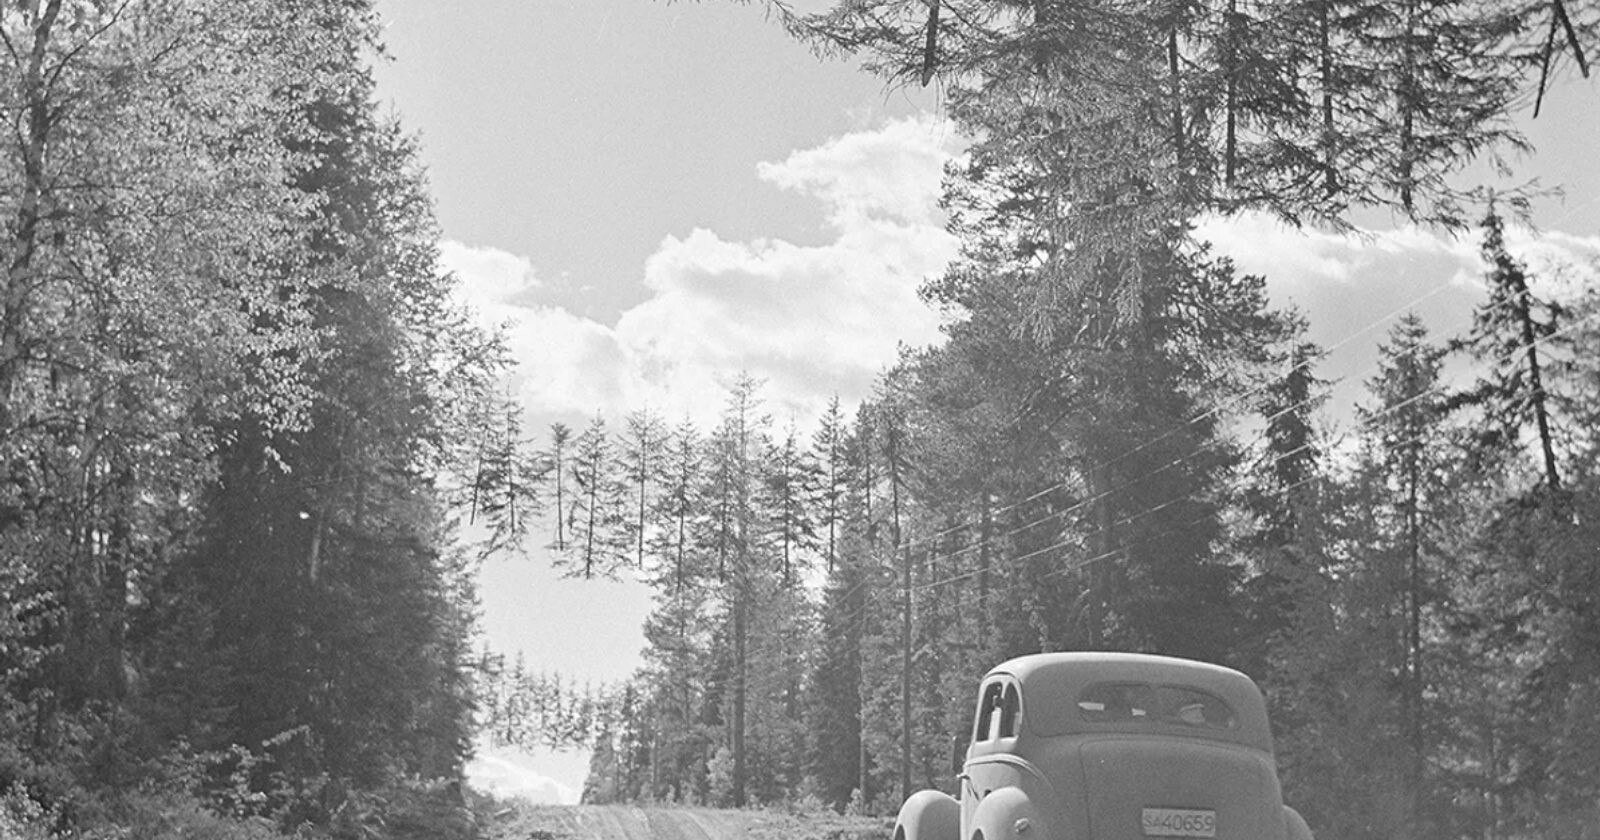 This Bizarre World War II Photo with Floating Trees is Not Photoshopped